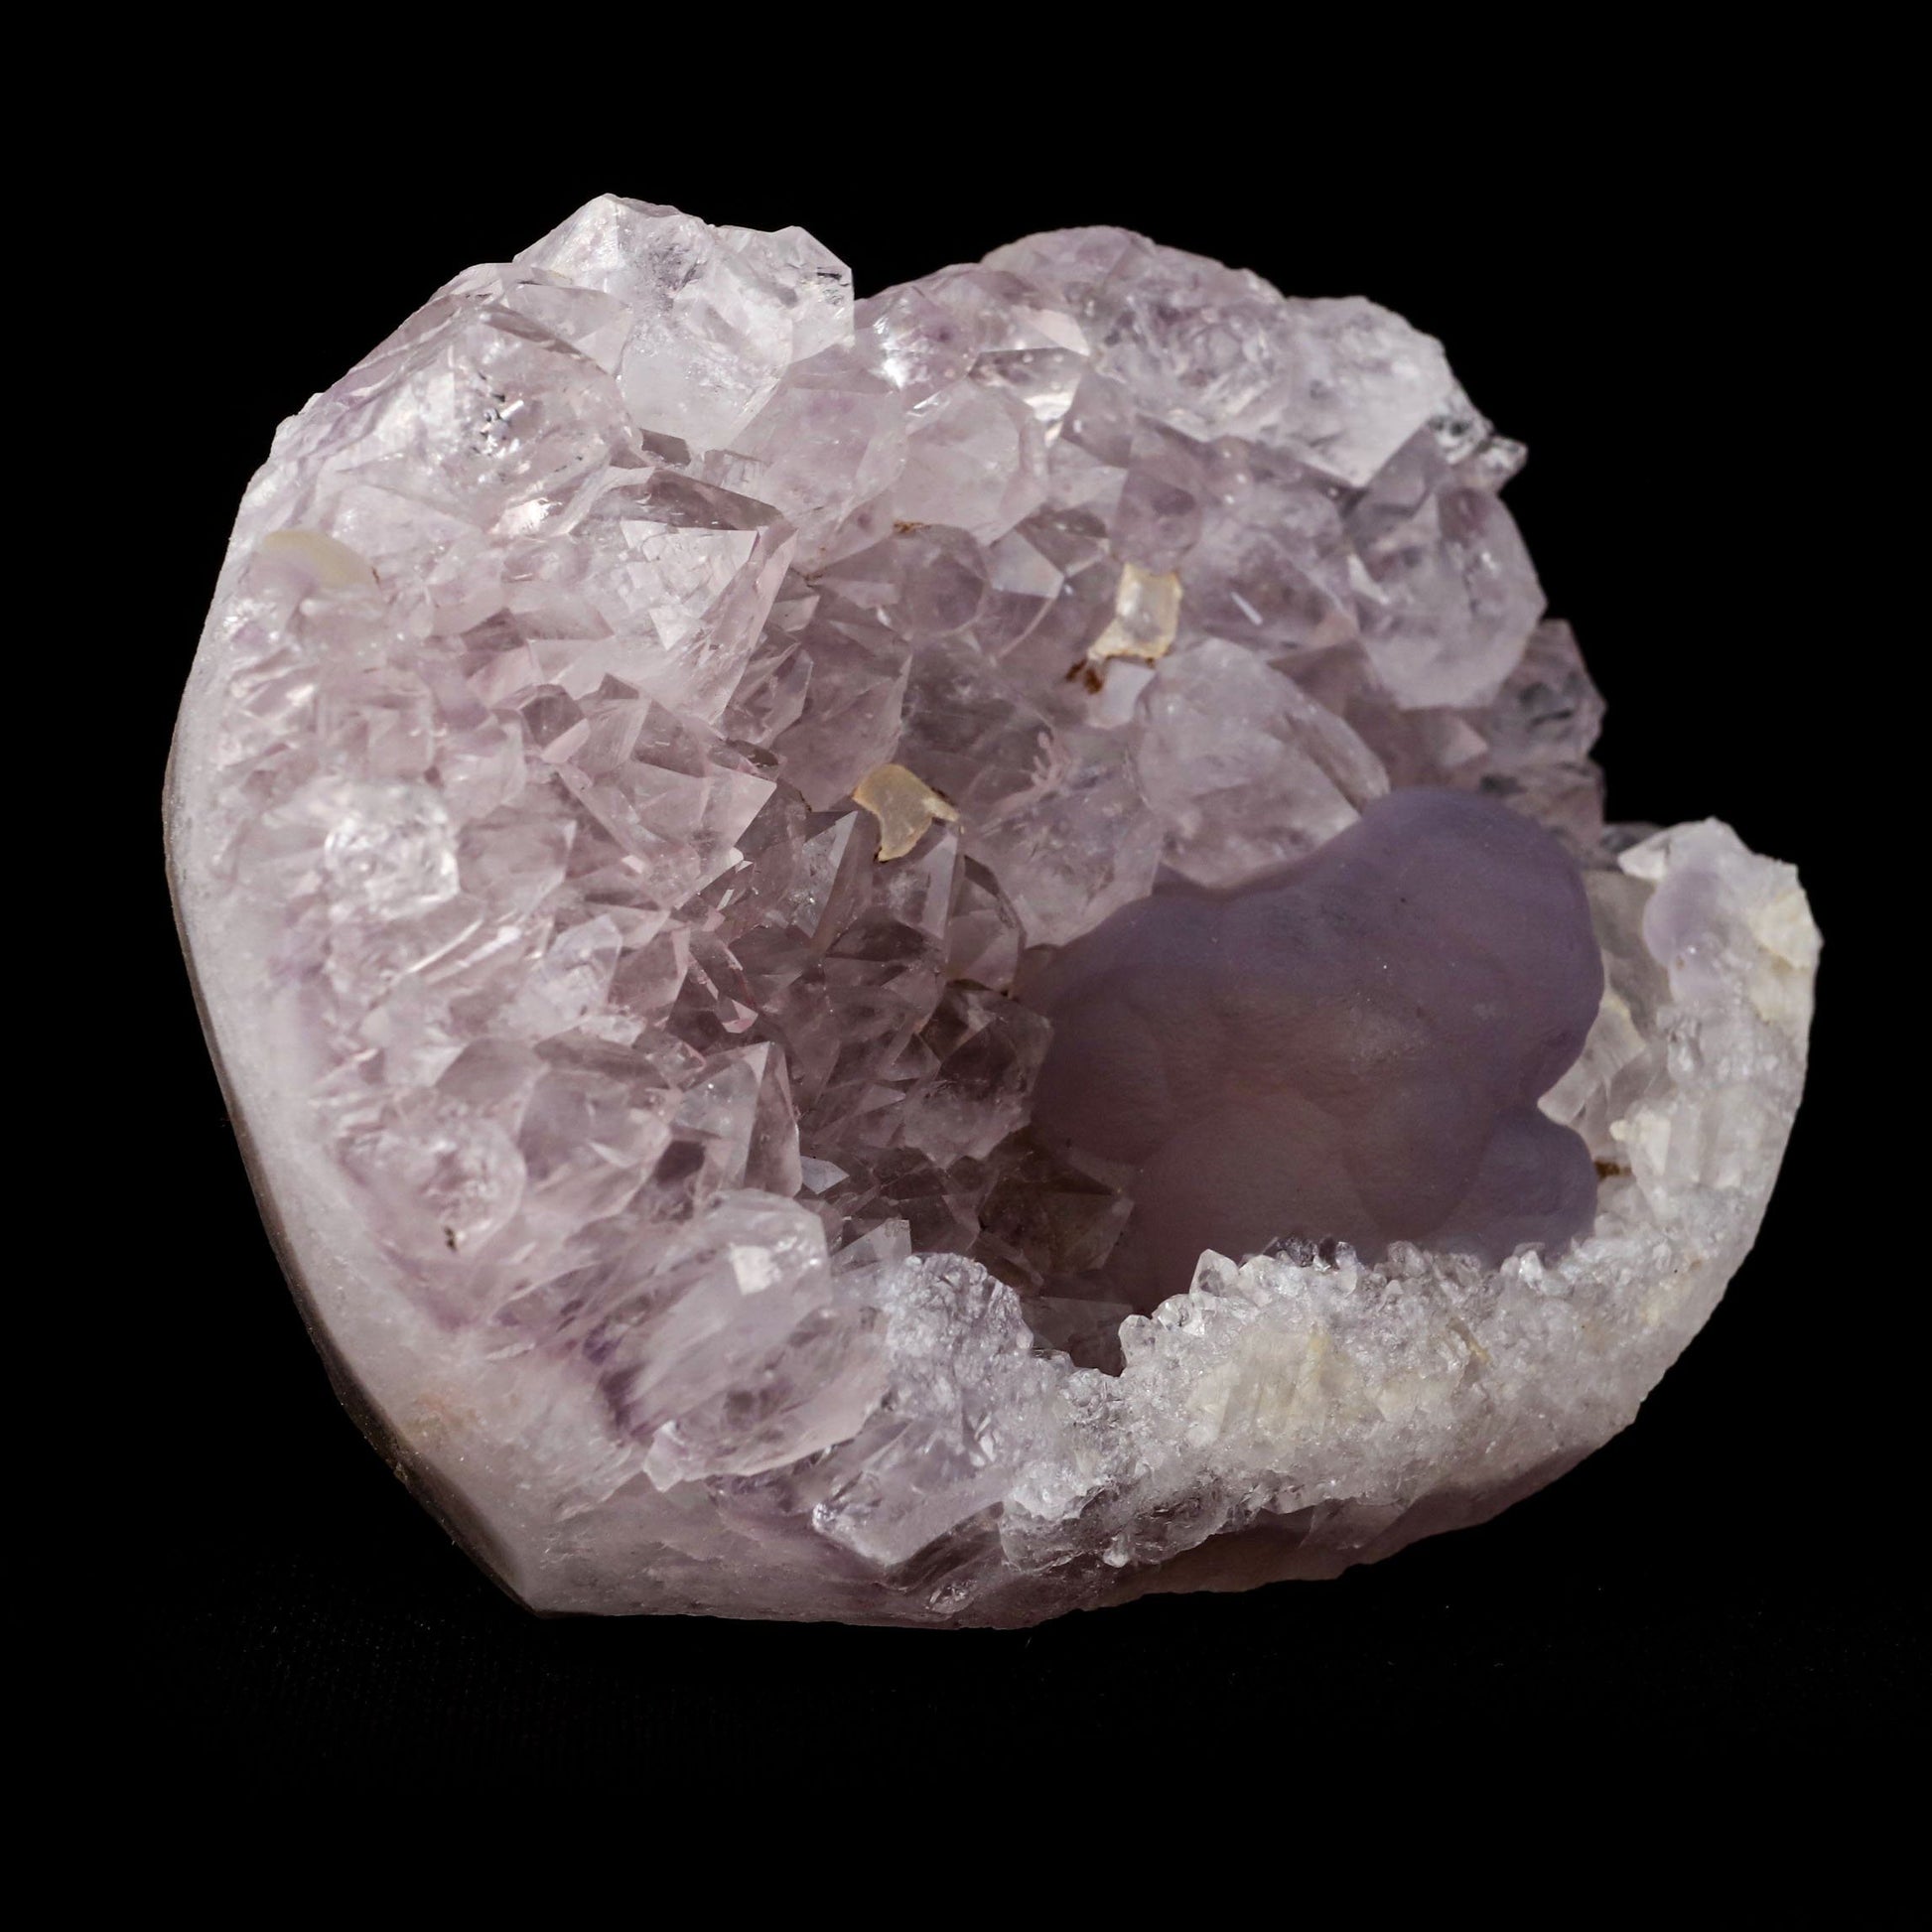 Blue Fluorite with Amethyst "Rare Find" Natural Mineral Specimen # B …  https://www.superbminerals.us/products/blue-fluorite-with-amethyst-rare-find-natural-mineral-specimen-b-4969  Features:This is a superb and unique piece featuring a large, complete and perfect spherical (botryoidal) formation of highly translucent blue colored Fluorite on a plate of lustrous amethyst. blue Fluorite spheres of this quality 